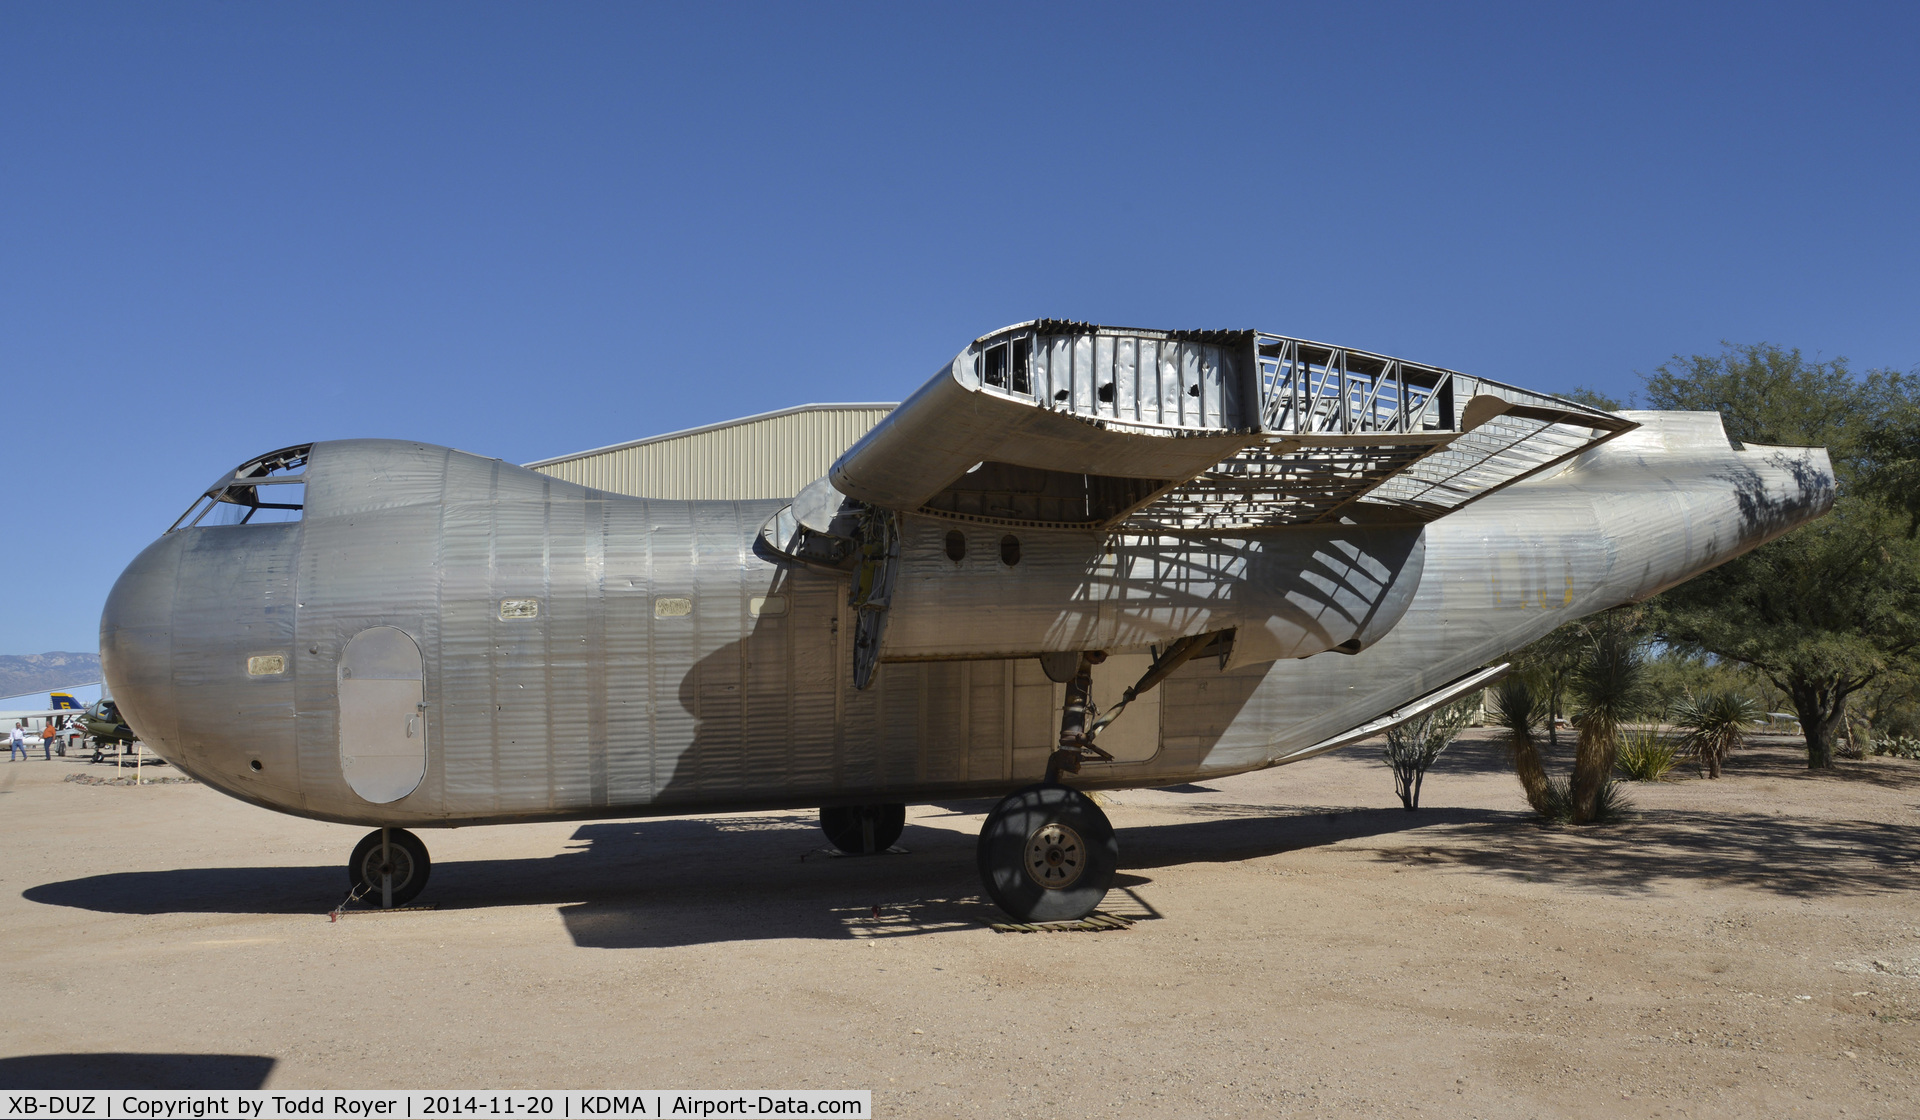 XB-DUZ, Budd RB-1 Conestoga C/N 016, On display at the Pima Air and Space Museum